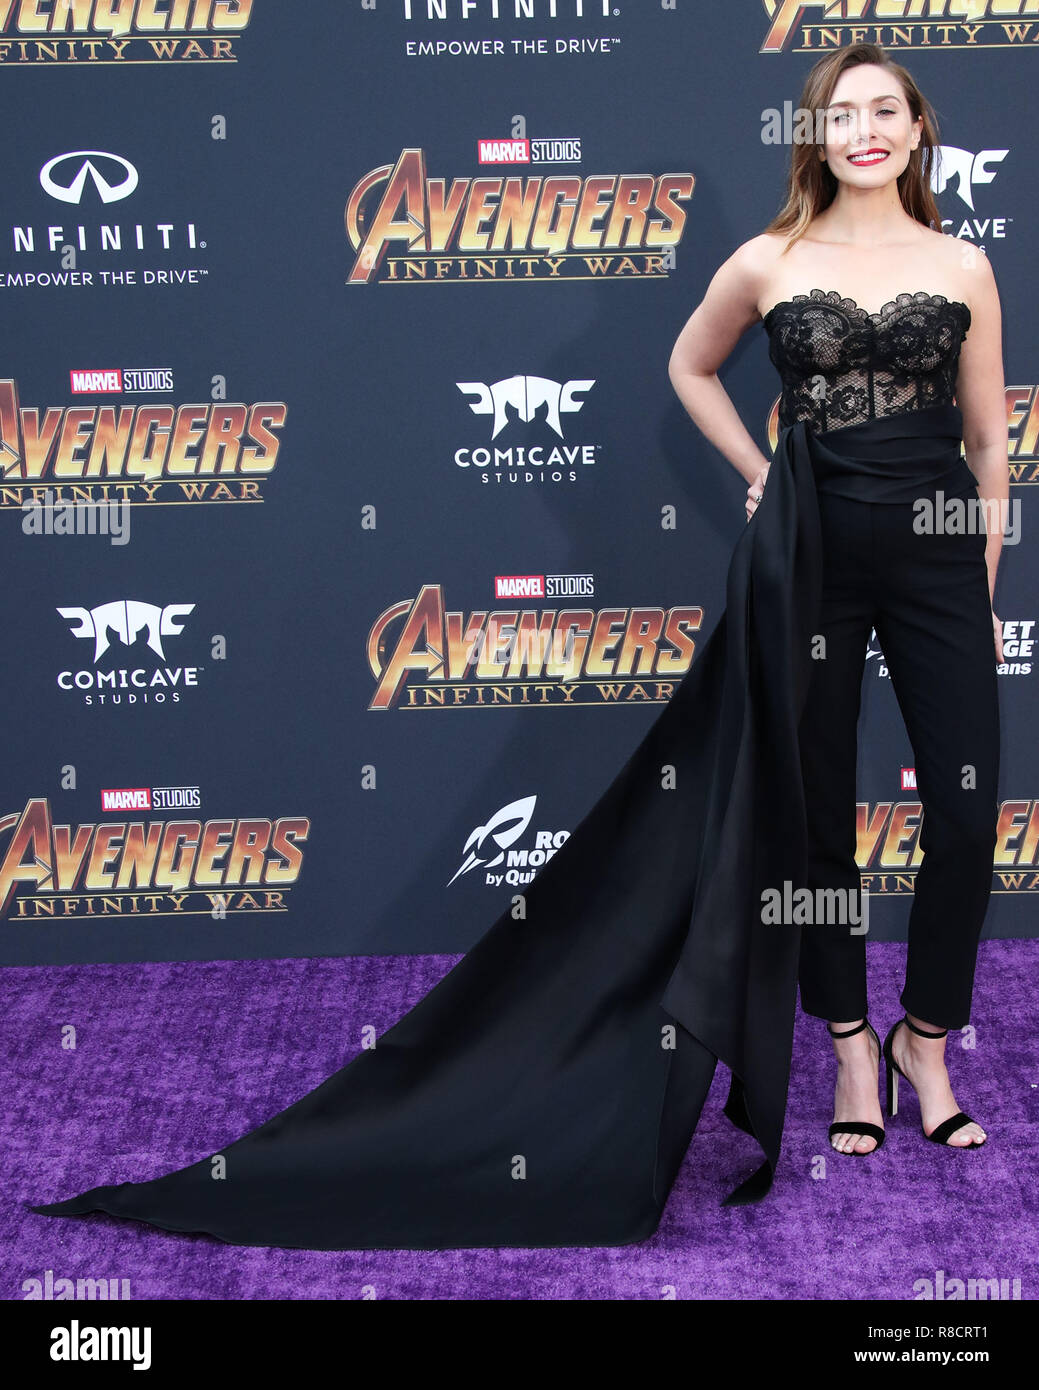 HOLLYWOOD, LOS ANGELES, CA, USA - APRIL 23: Elizabeth Olsen at the World Premiere Of Disney And Marvel's 'Avengers: Infinity War' held at the El Capitan Theatre, Dolby Theatre and TCL Chinese Theatre IMAX on April 23, 2018 in Hollywood, Los Angeles, California, United States. (Photo by Xavier Collin/Image Press Agency) Stock Photo